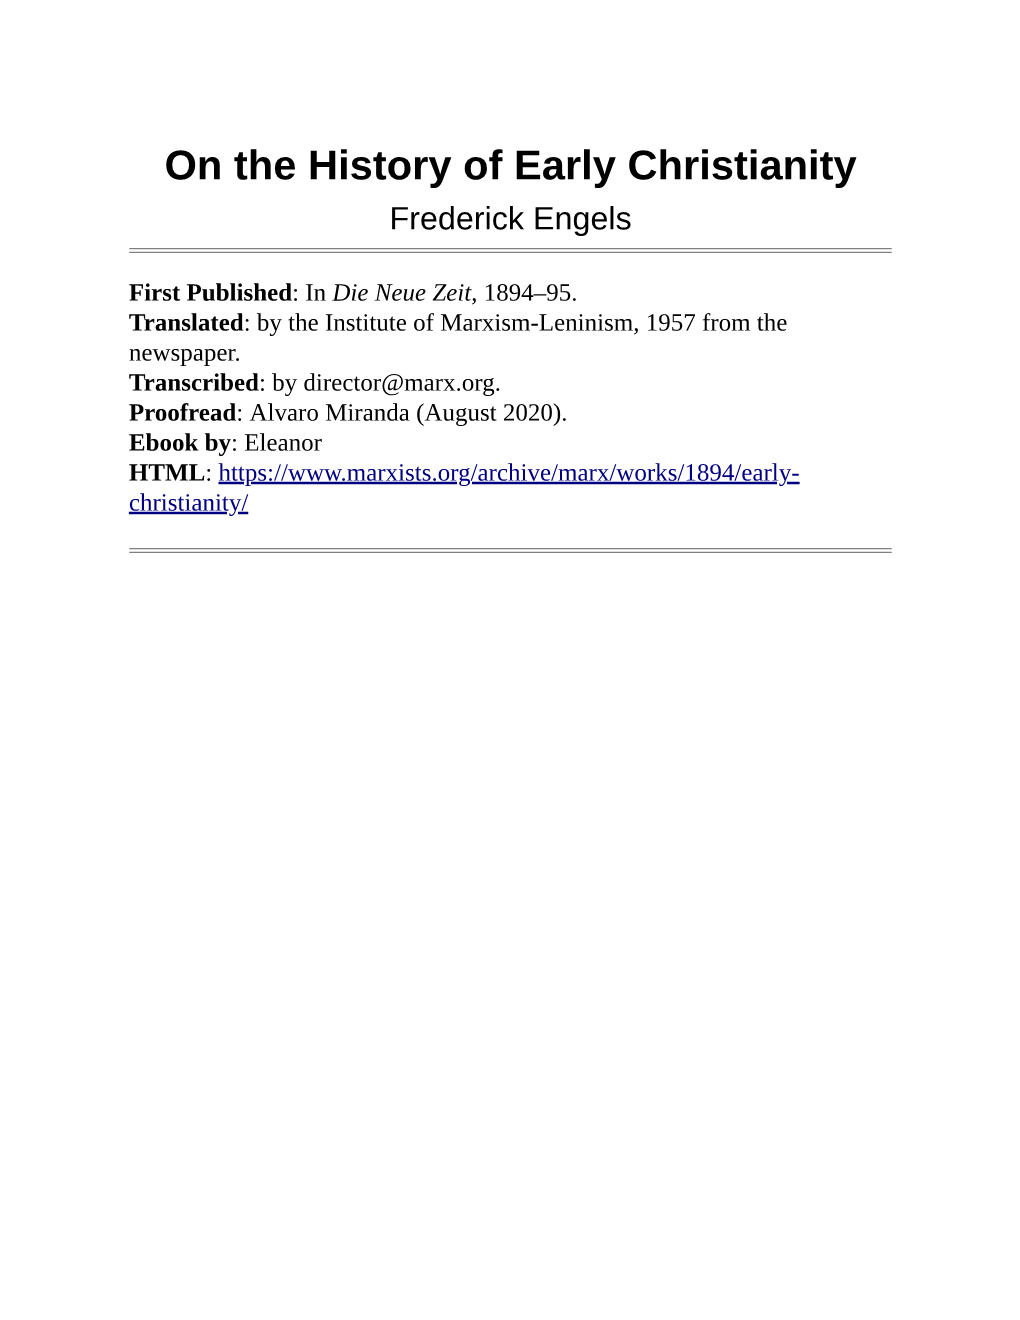 On the History of Early Christianity Frederick Engels